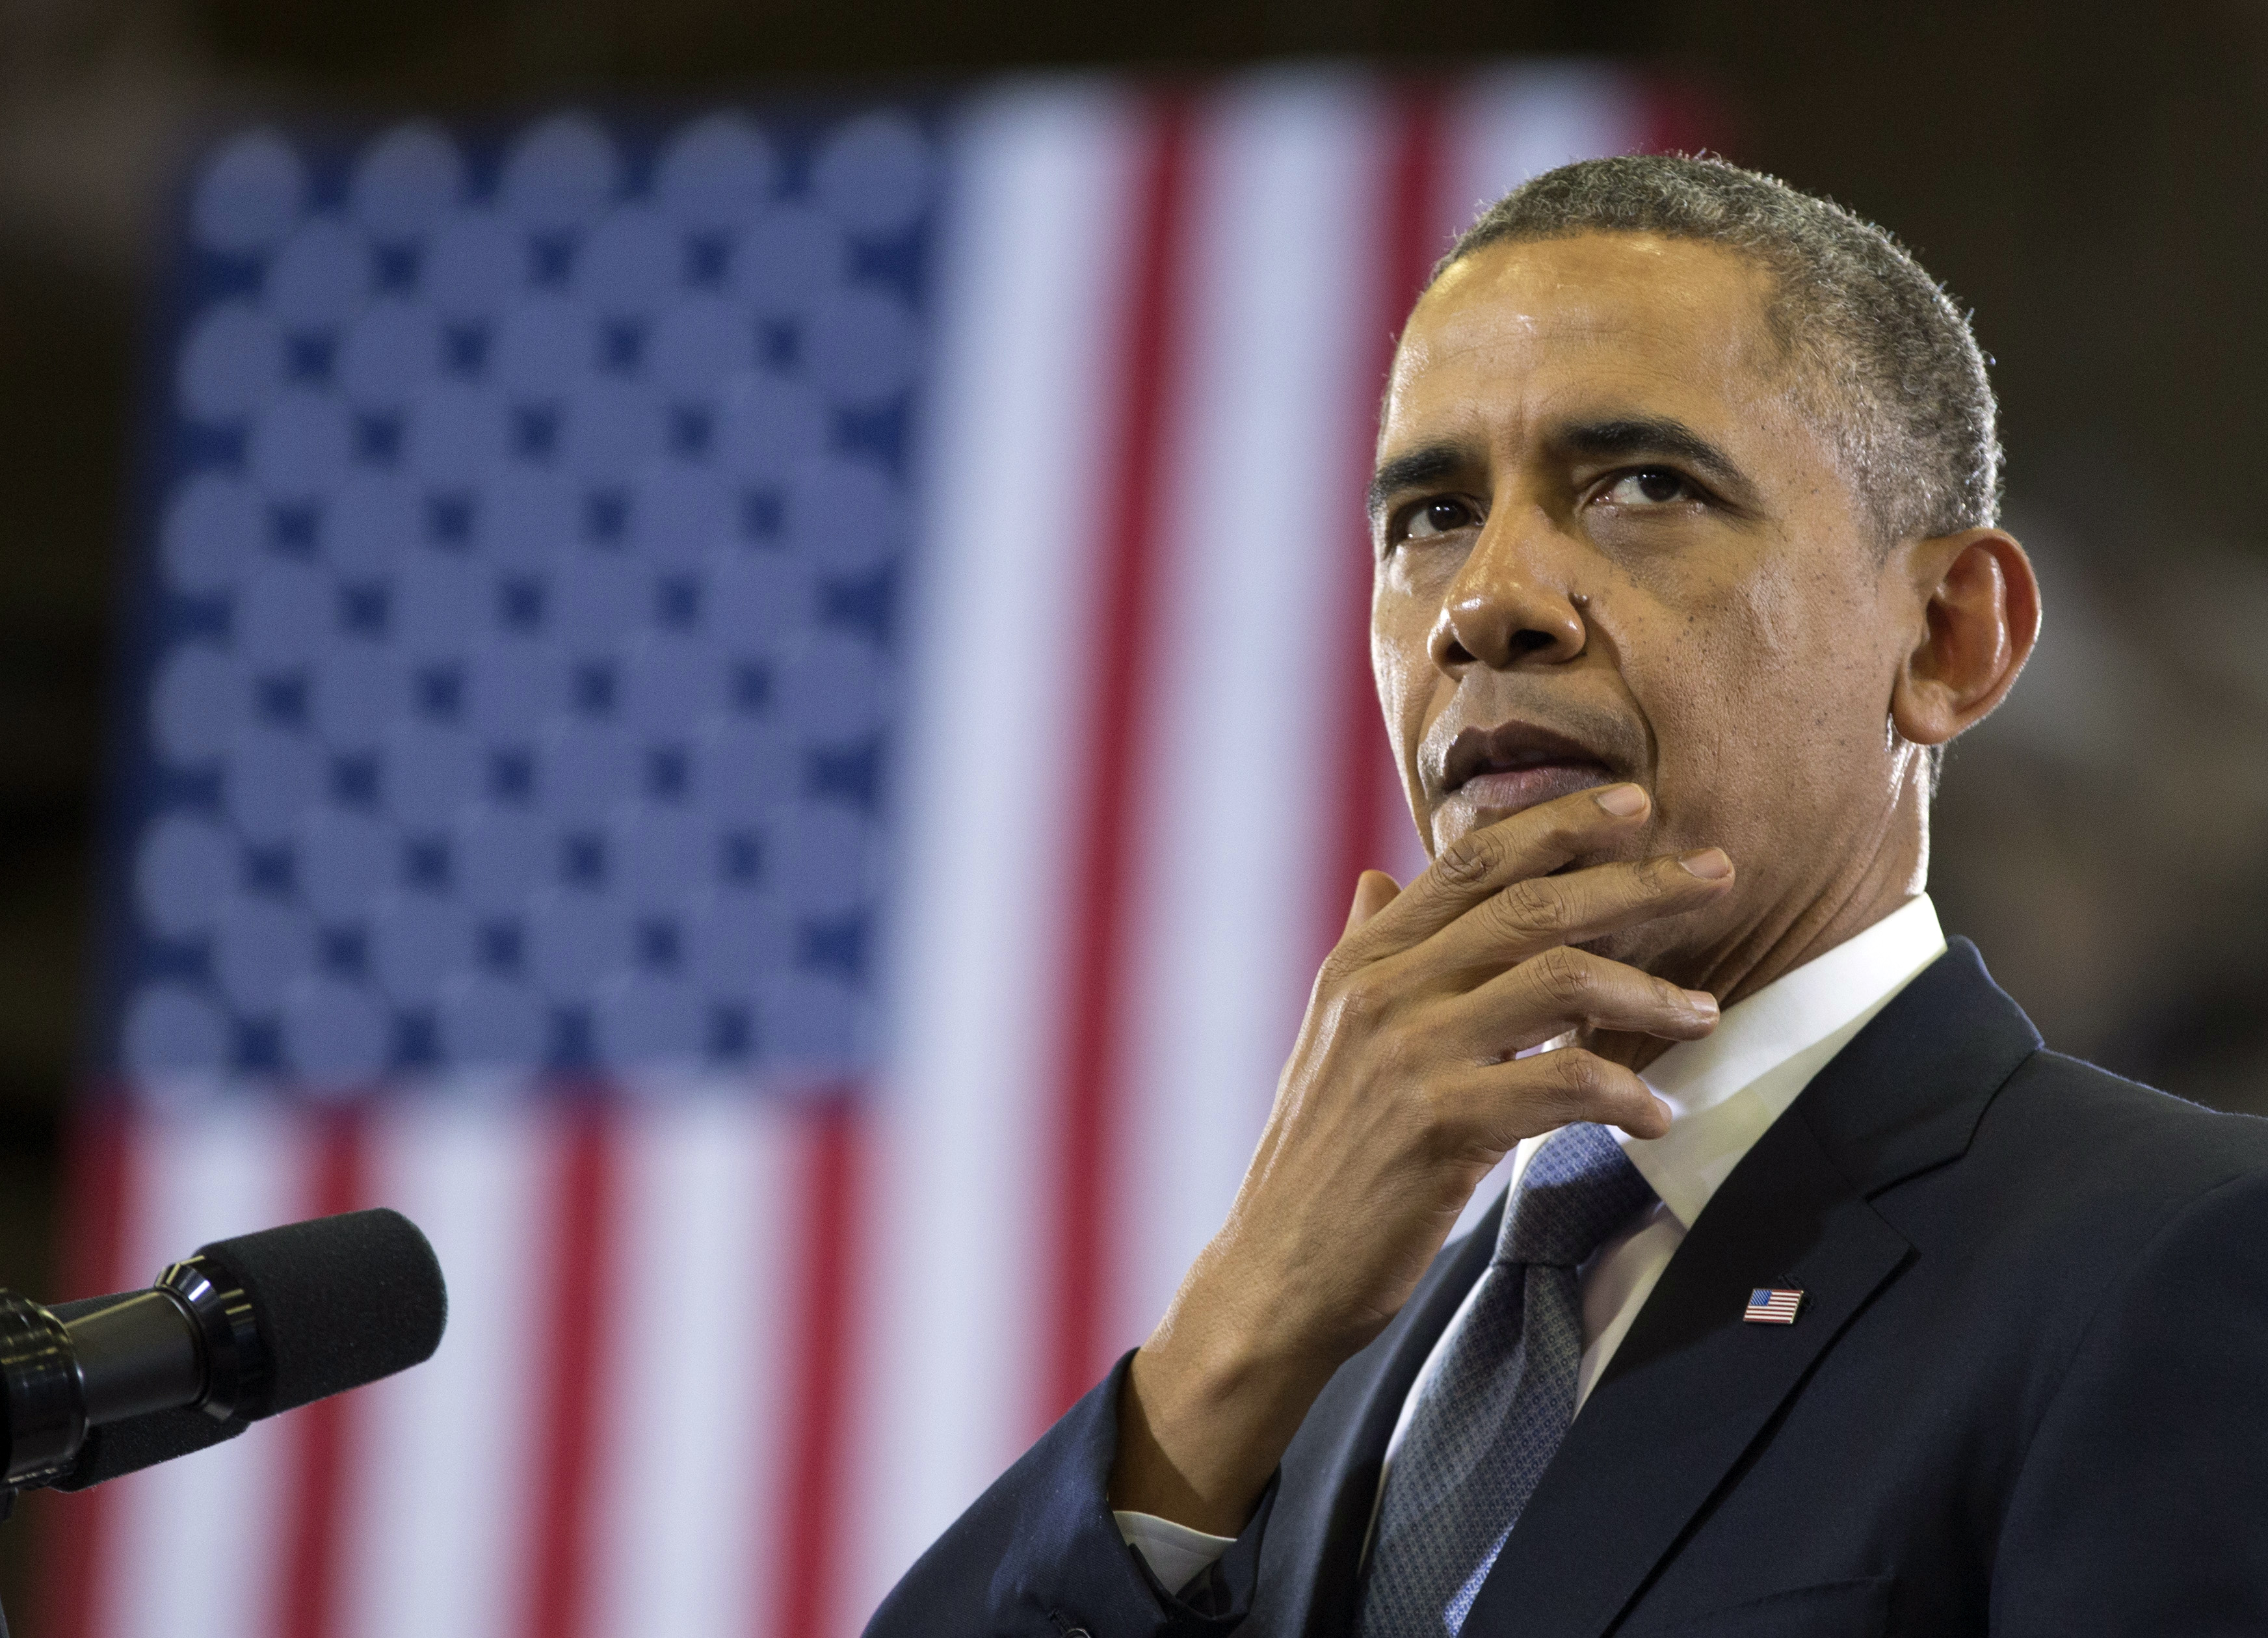 President Obama pauses as he speaks at McGavock High School, Jan. 30, 2014, in Nashville, Tenn., about education. (AP)